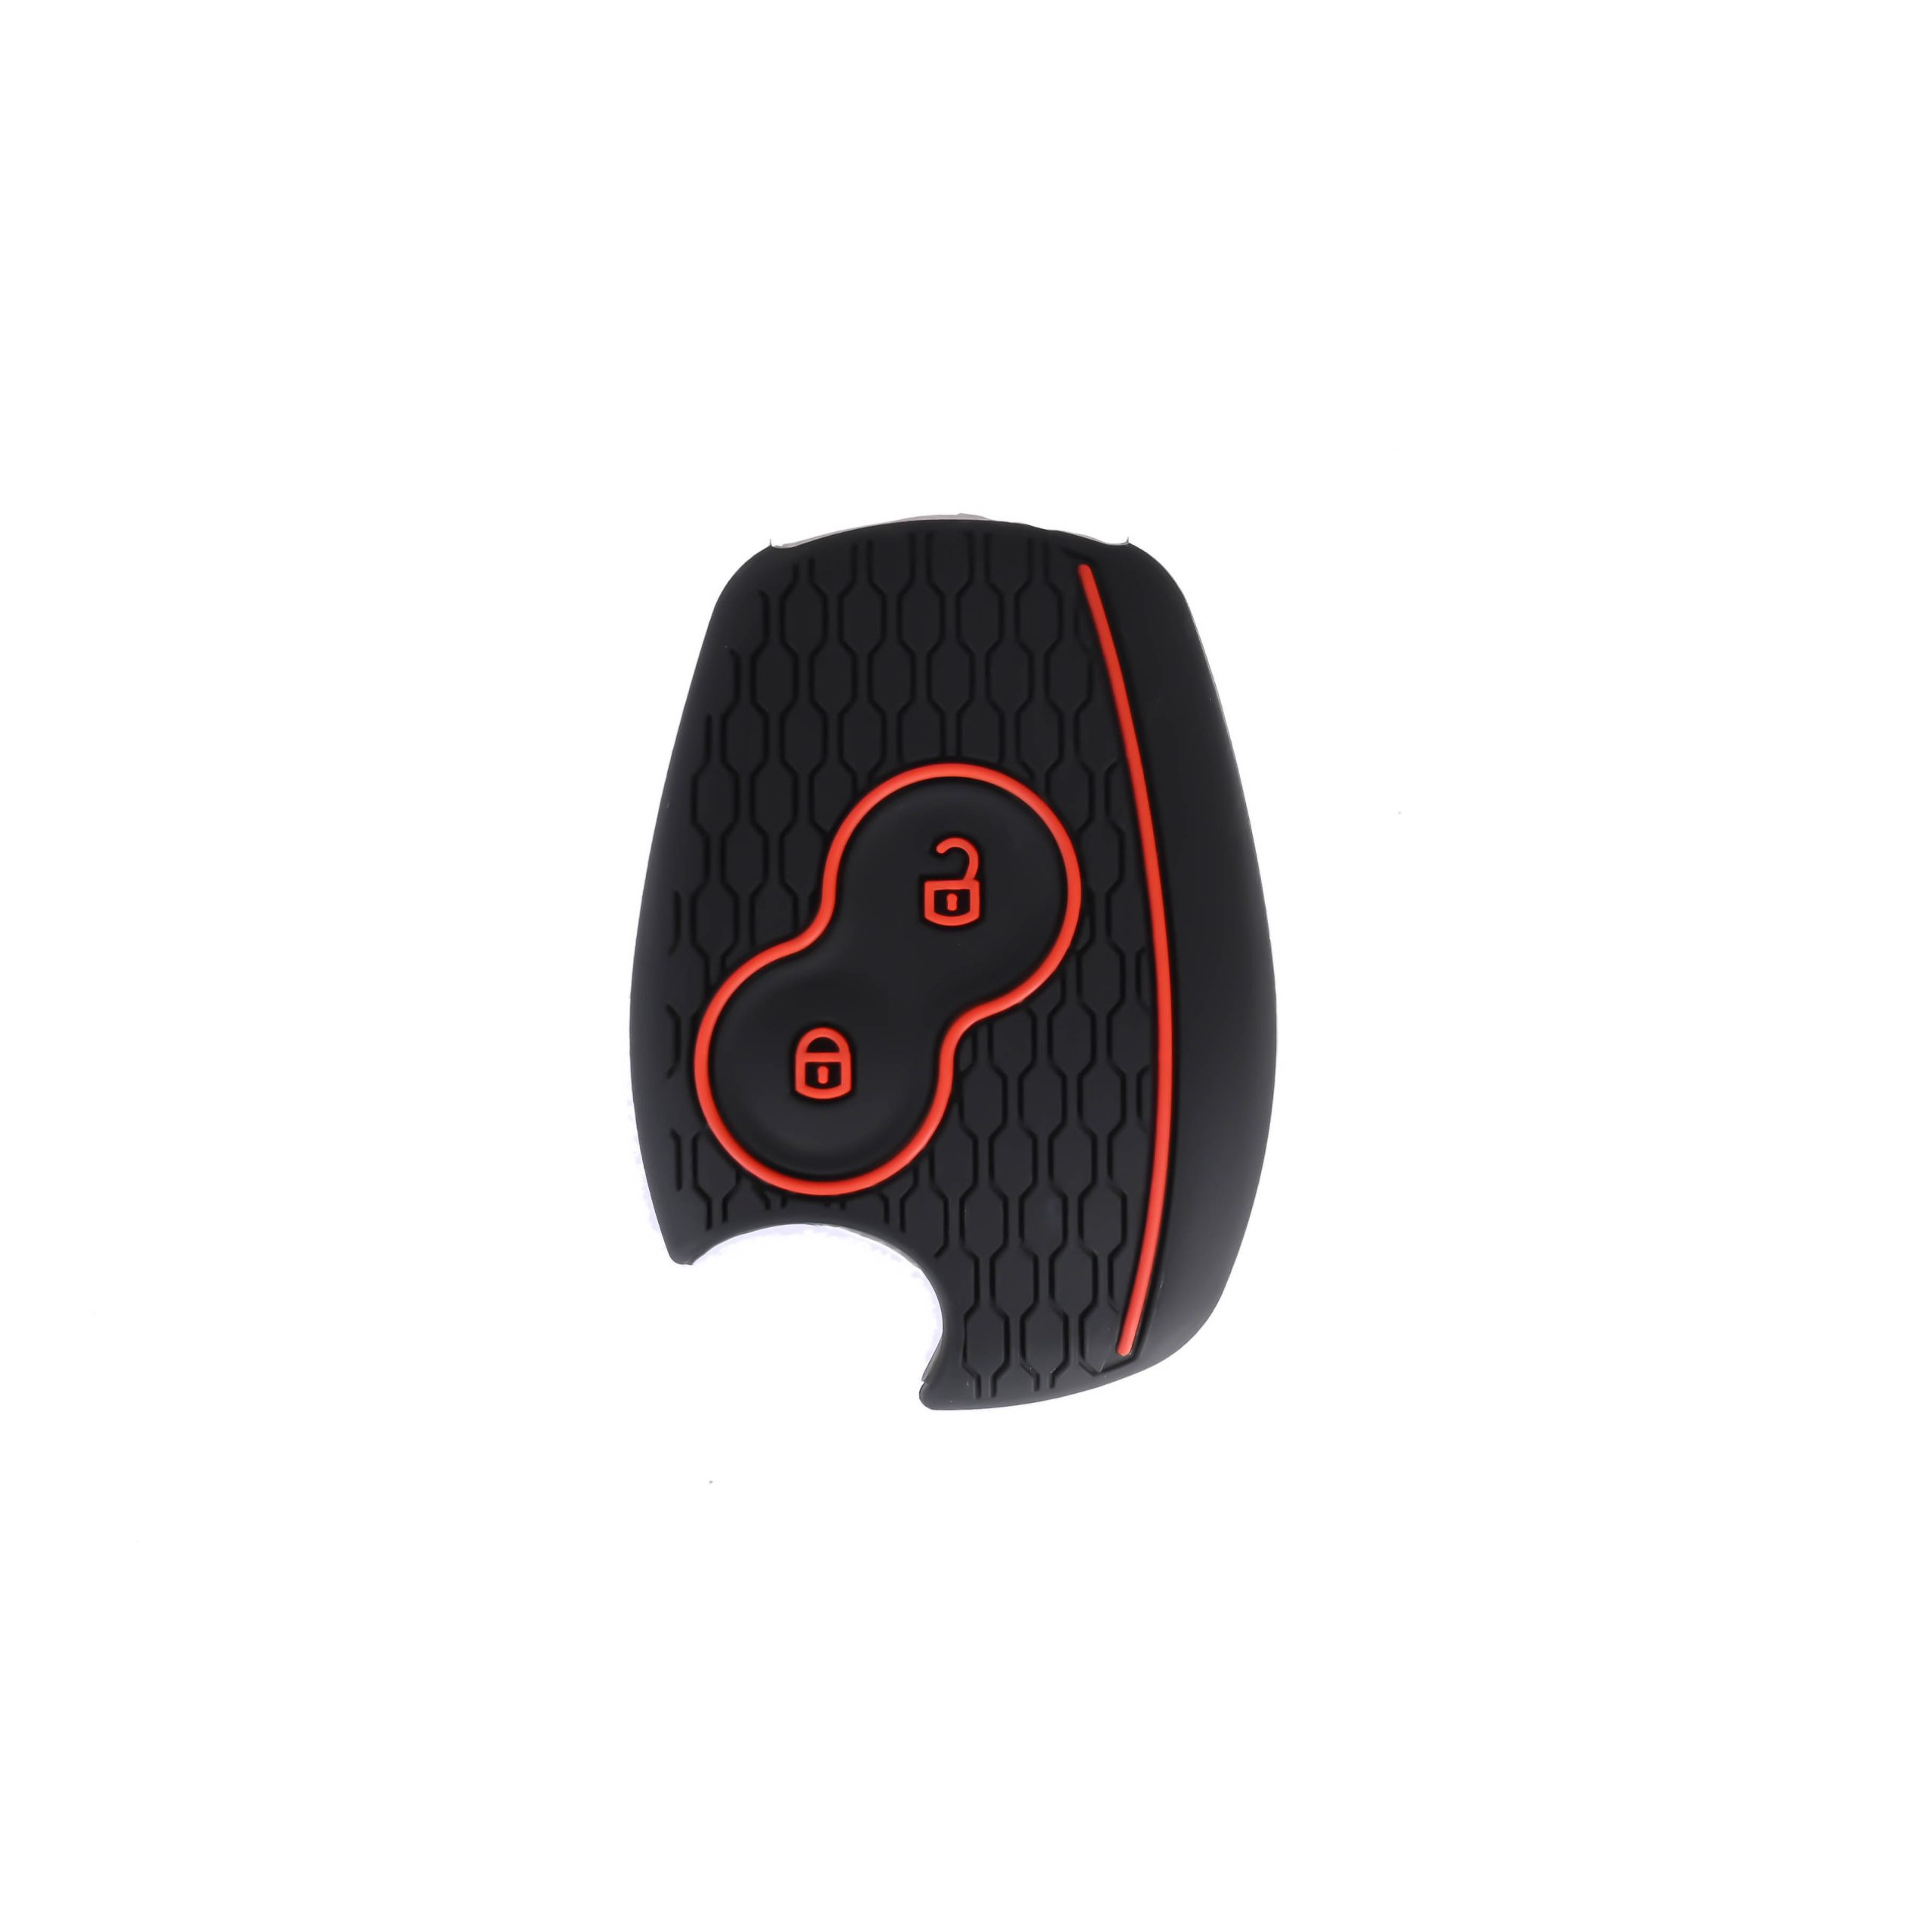 renault silicon car key cover